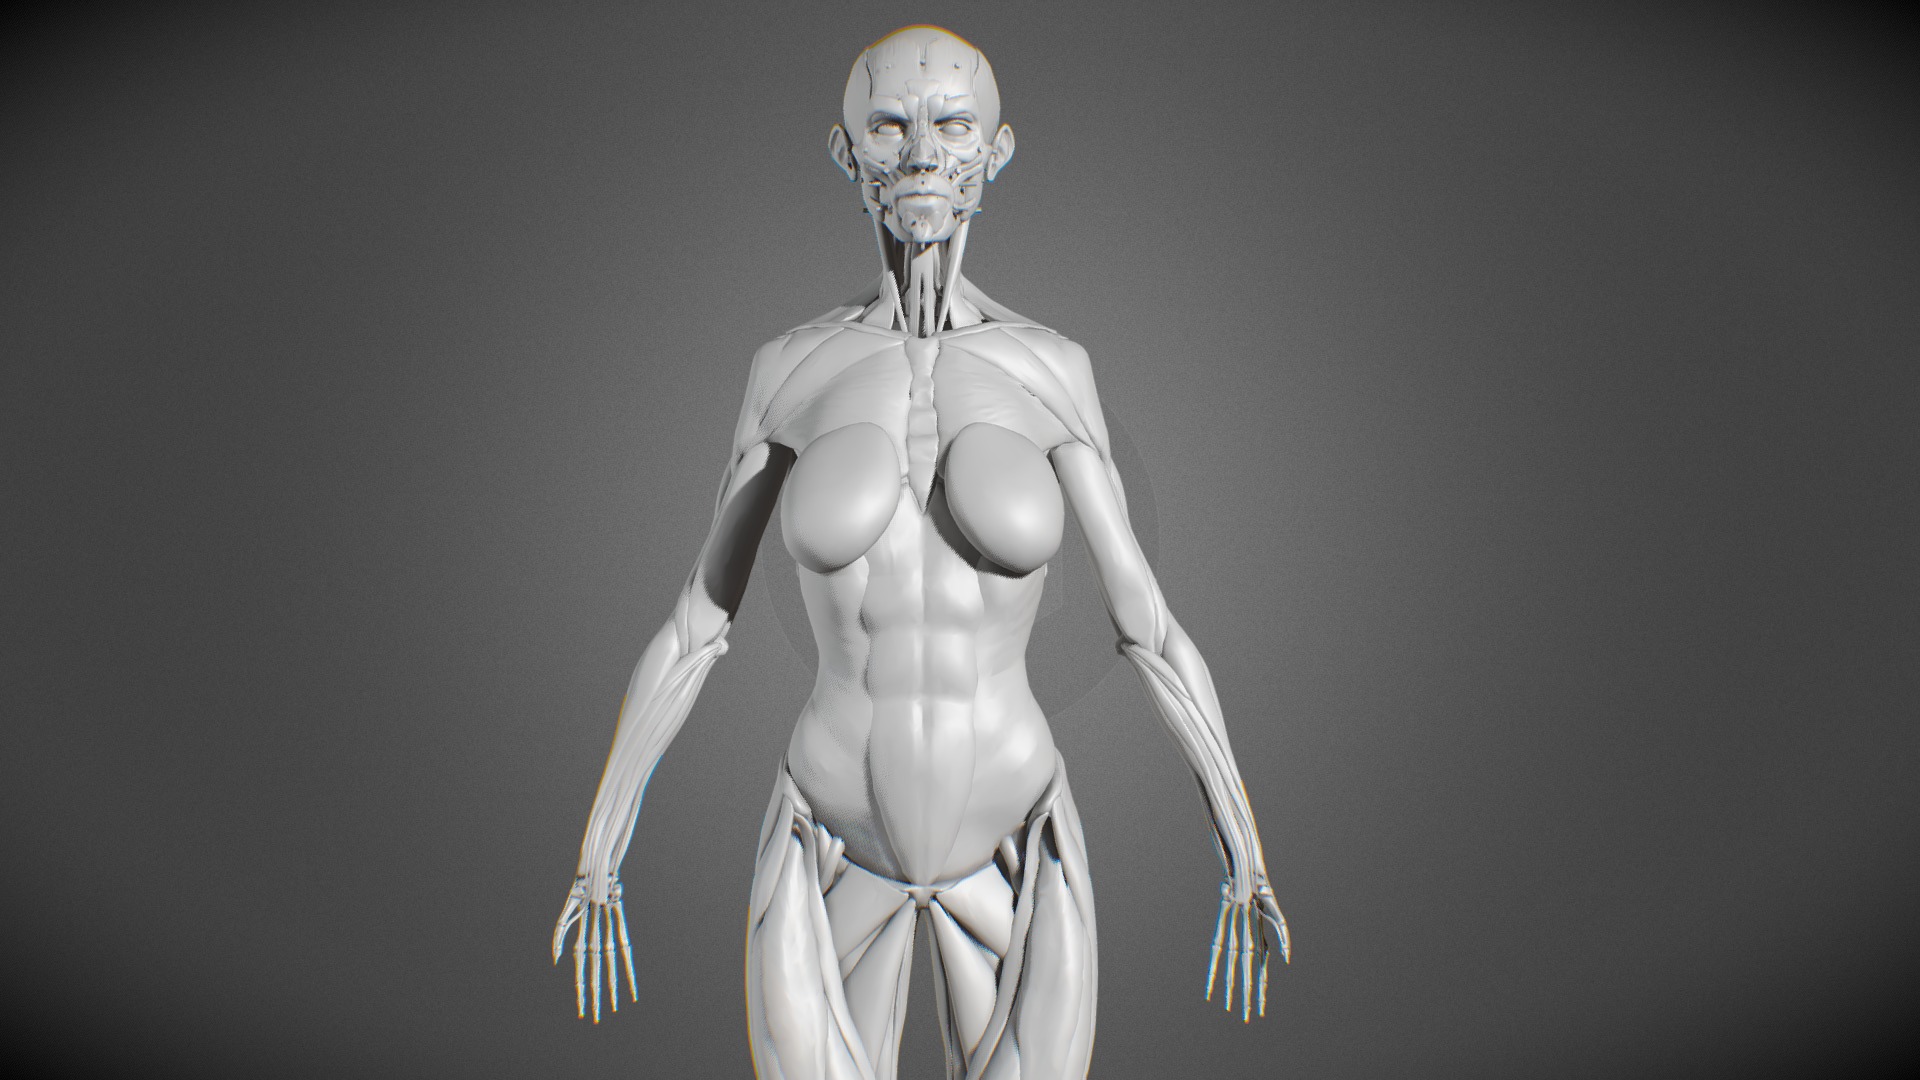 My first try in human anatomy study within ZBrush 3d model